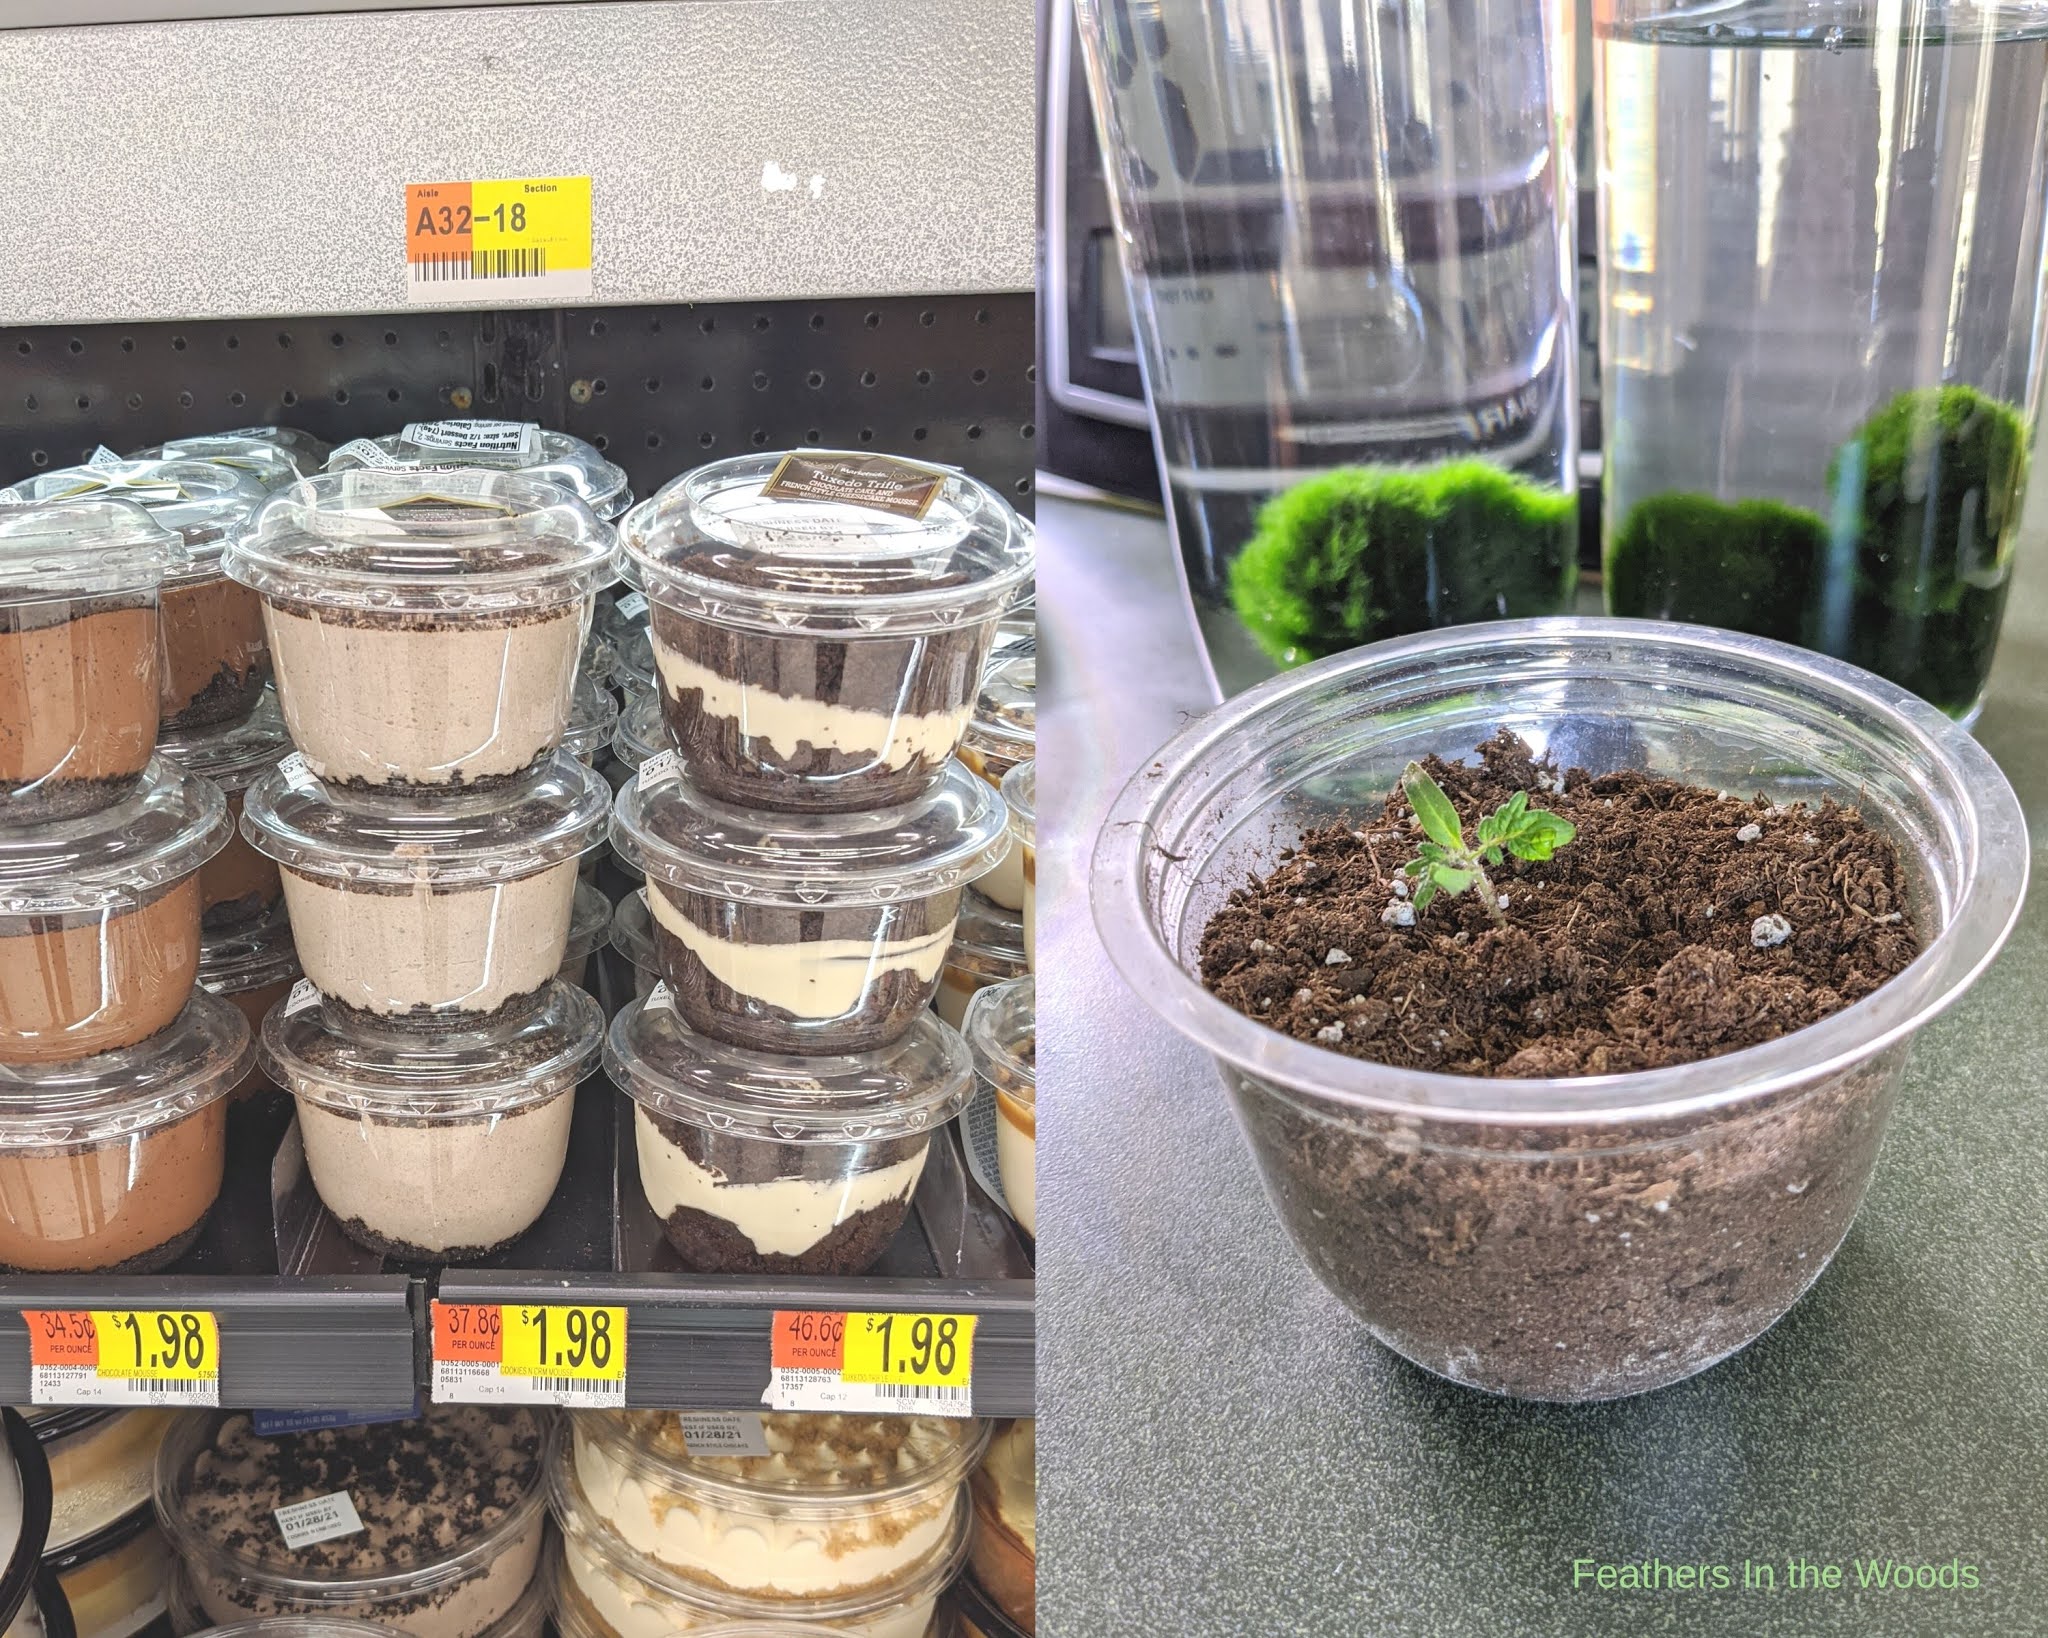 Reuse Old Orchard Juice Containers to Plant Seedlings!